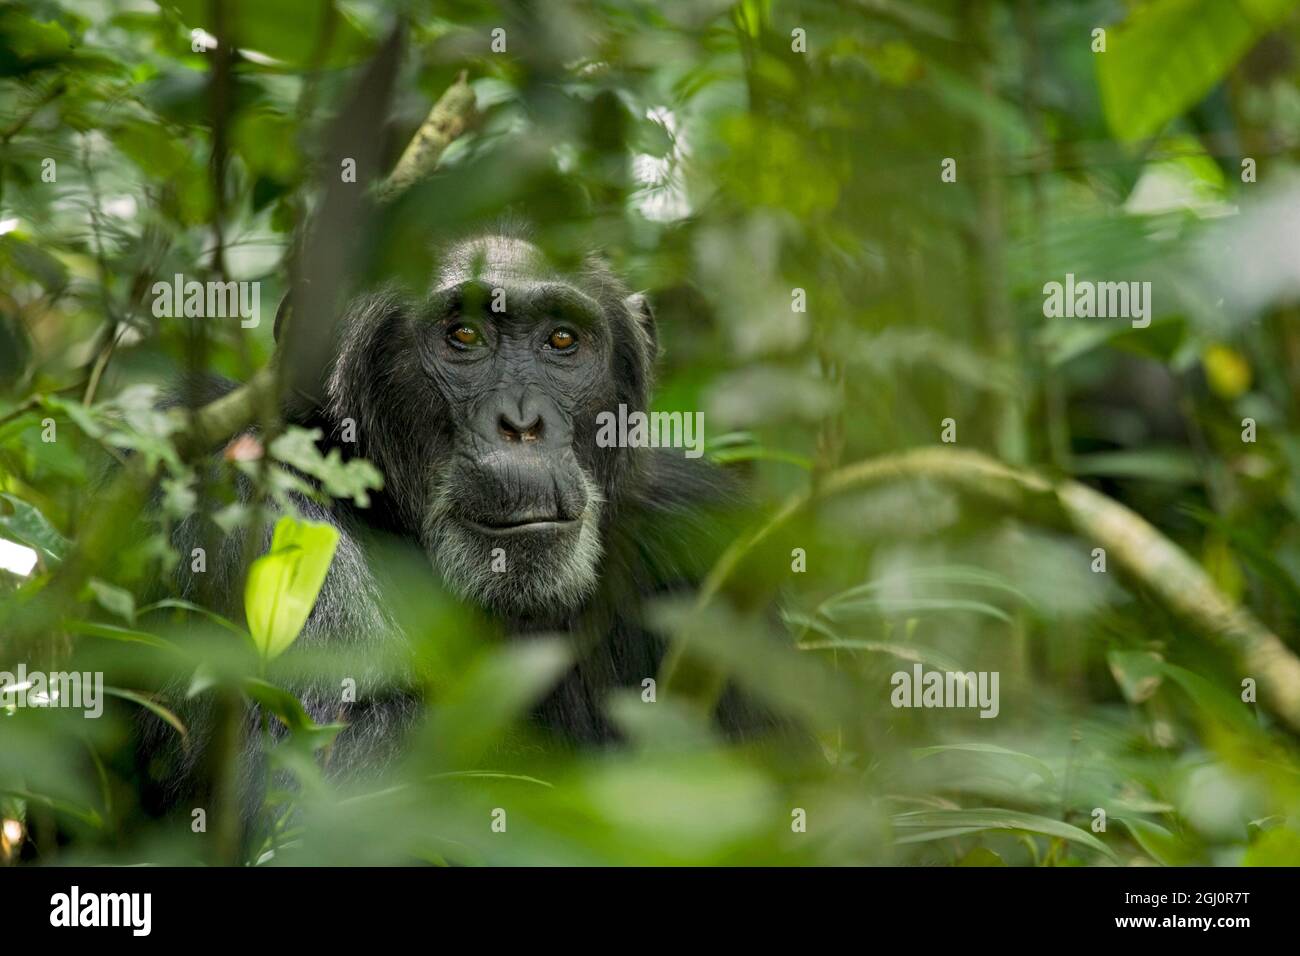 Africa, Uganda, Kibale National Park, Ngogo Chimpanzee Project. A male chimpanzee listens and surveys his surroundings from behind thick vegetation. Stock Photo